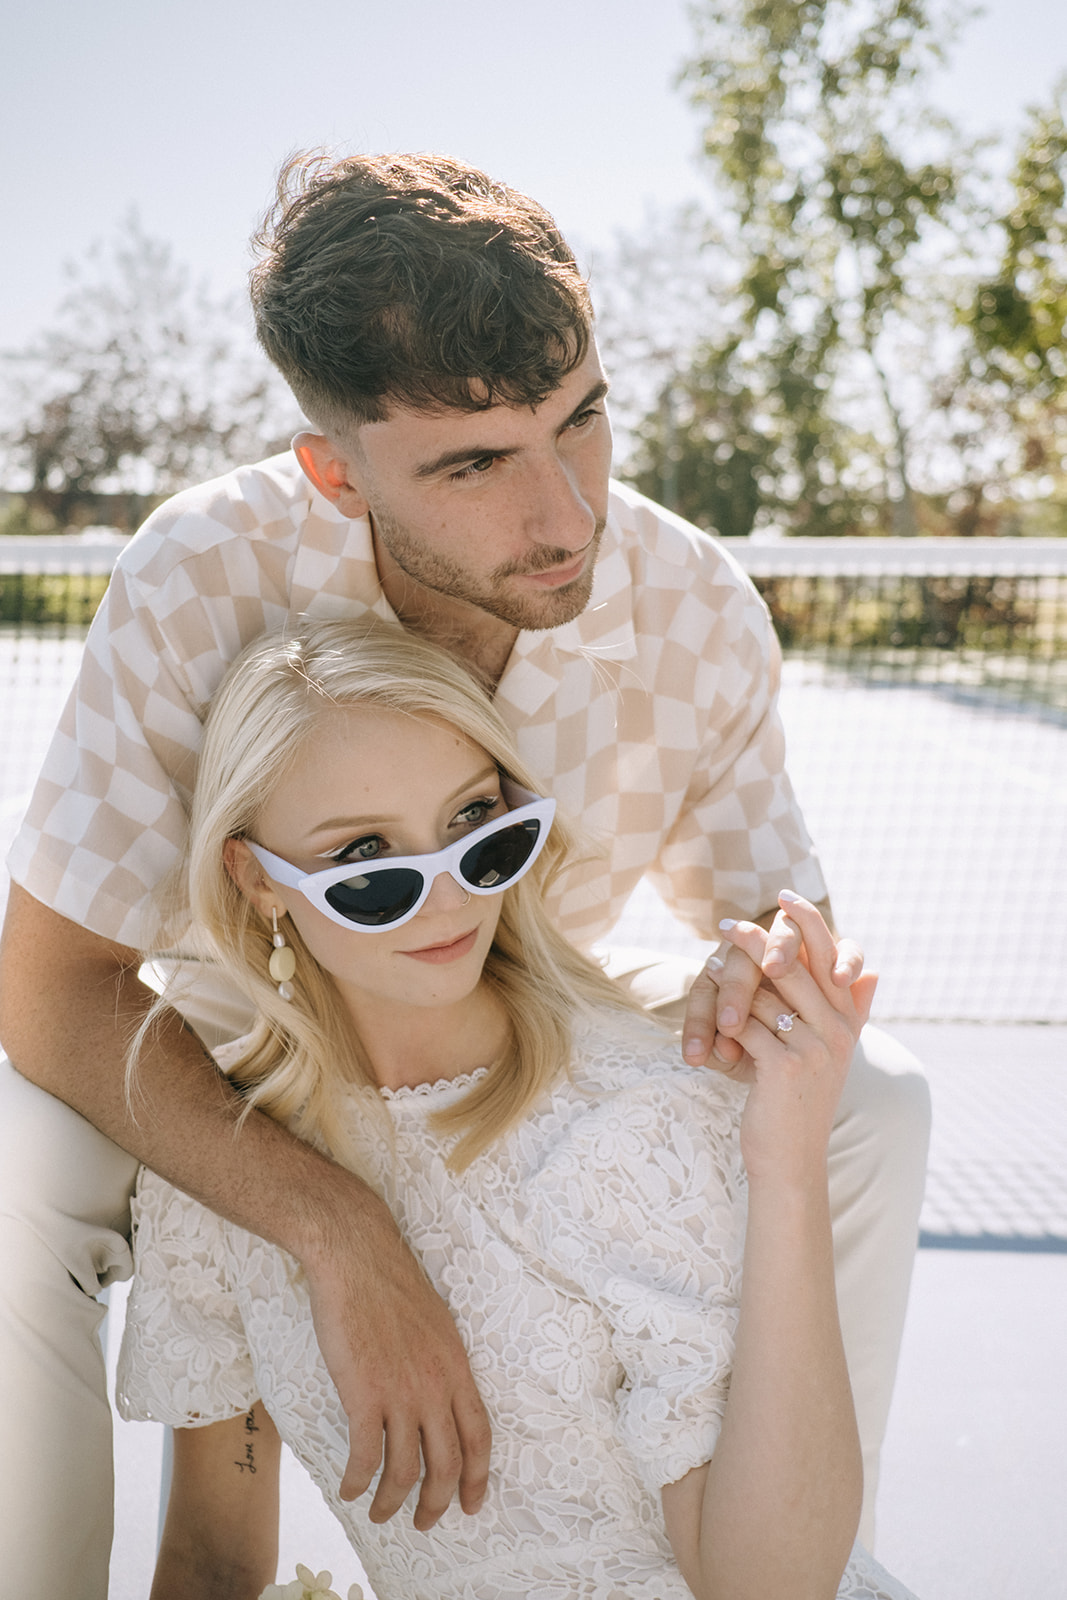 Bride is wearing white cat-eye sunglasses for bridal portrait, casual groom attire suggestions for a laid-back and comfortable vibe, sporty idea for couples portraits on a tennis court